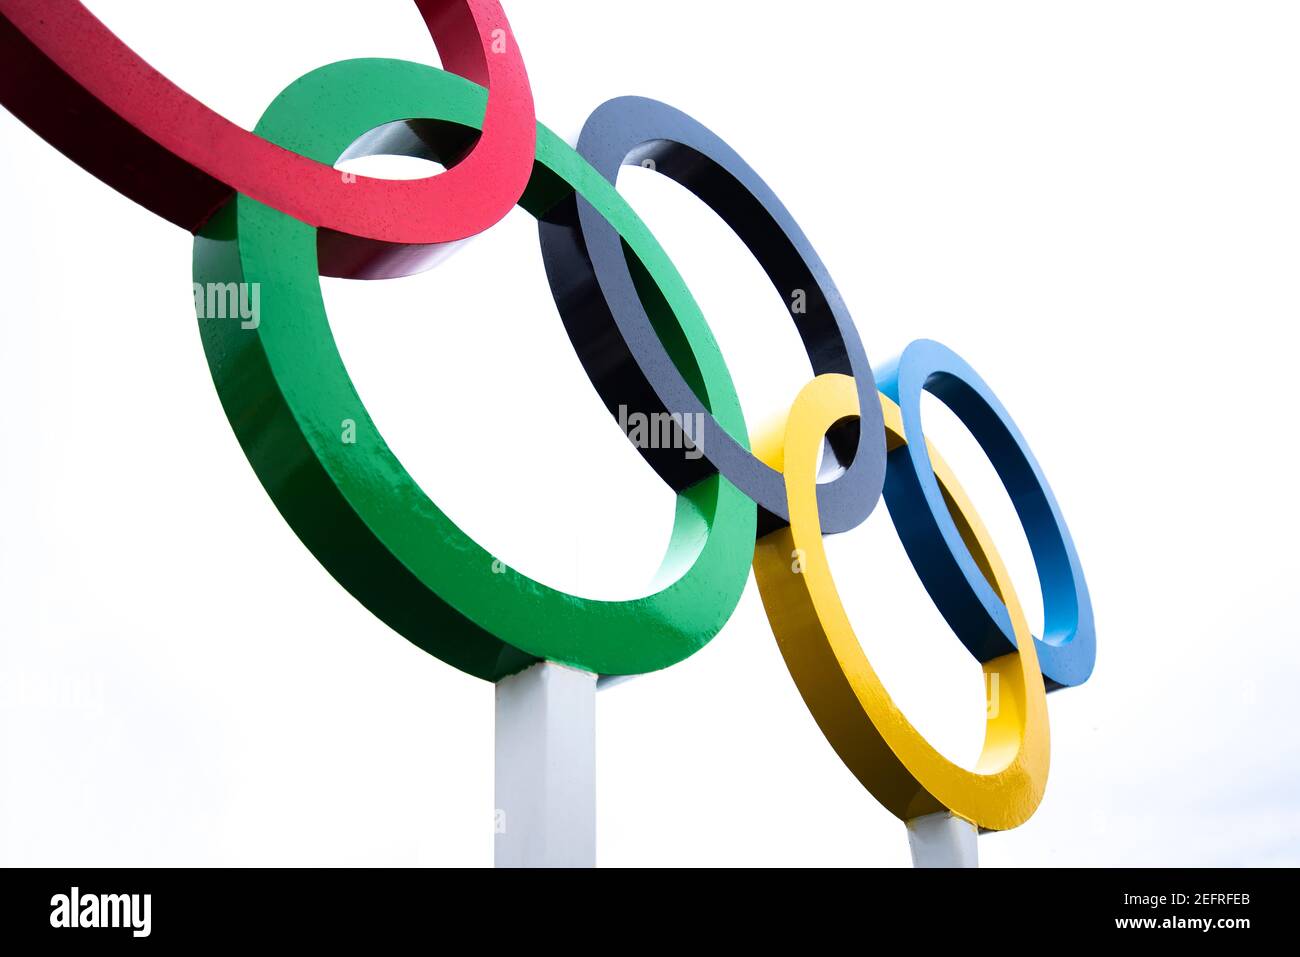 Five intertwined rings in blue, black, red, yellow and green on a white background Stock Photo